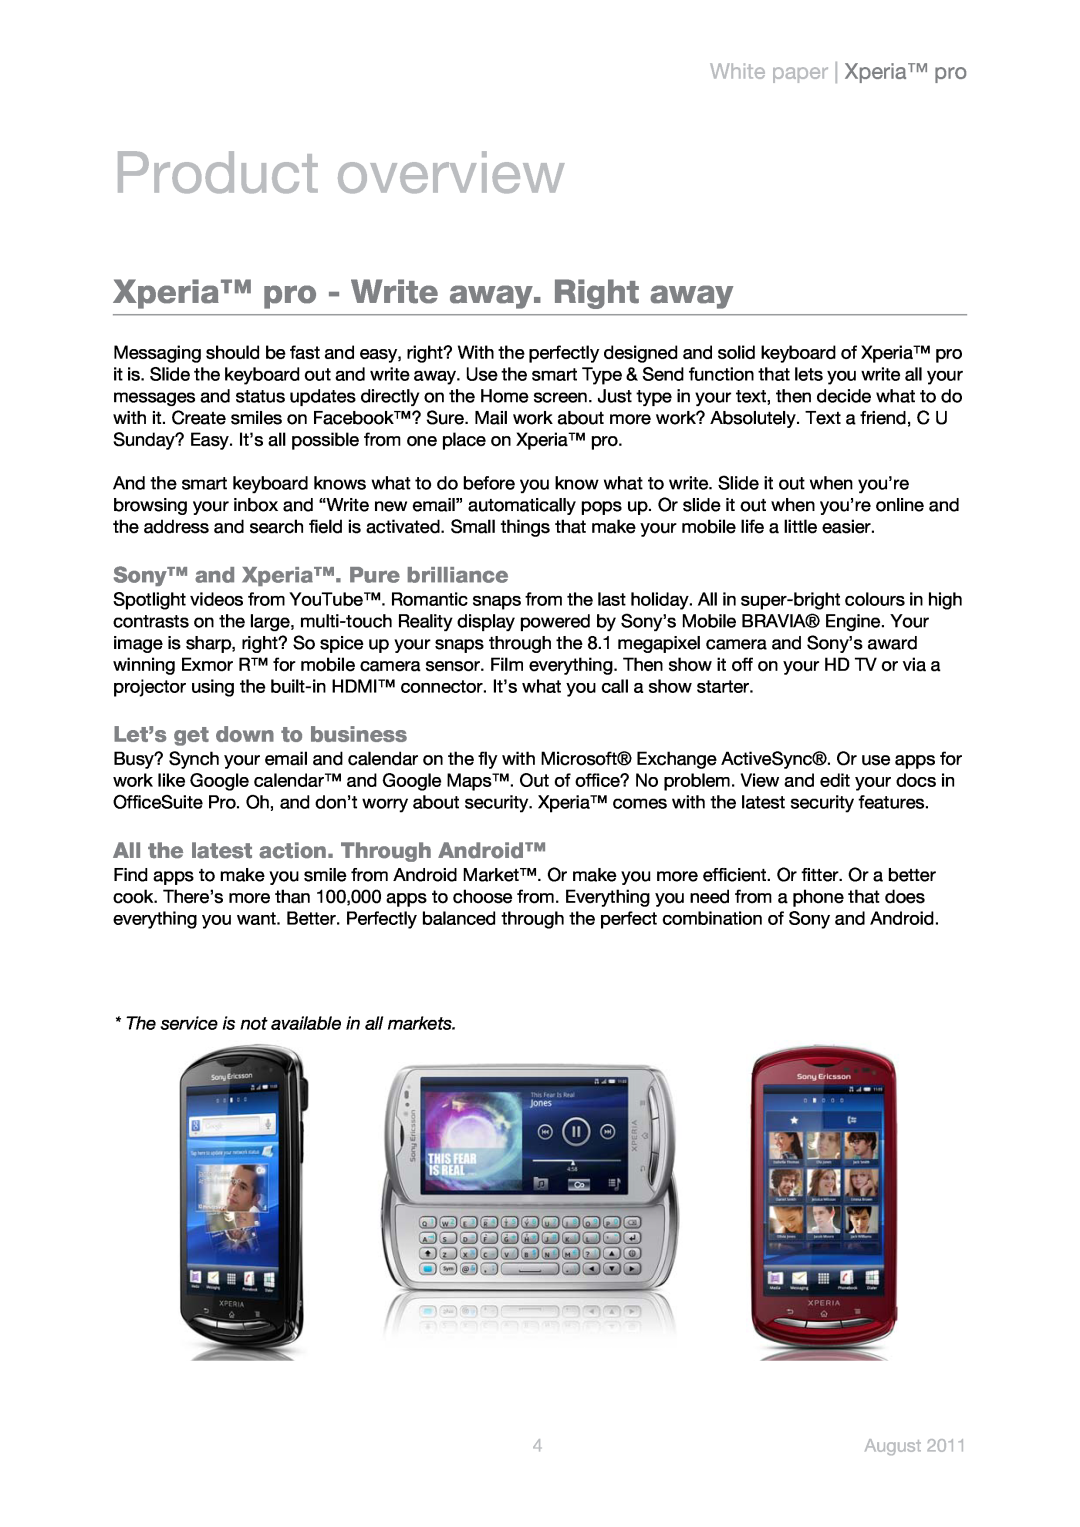 Sony Ericsson MK16a, MK16i Product overview, Xperia pro - Write away. Right away, Sony and Xperia. Pure brilliance, August 